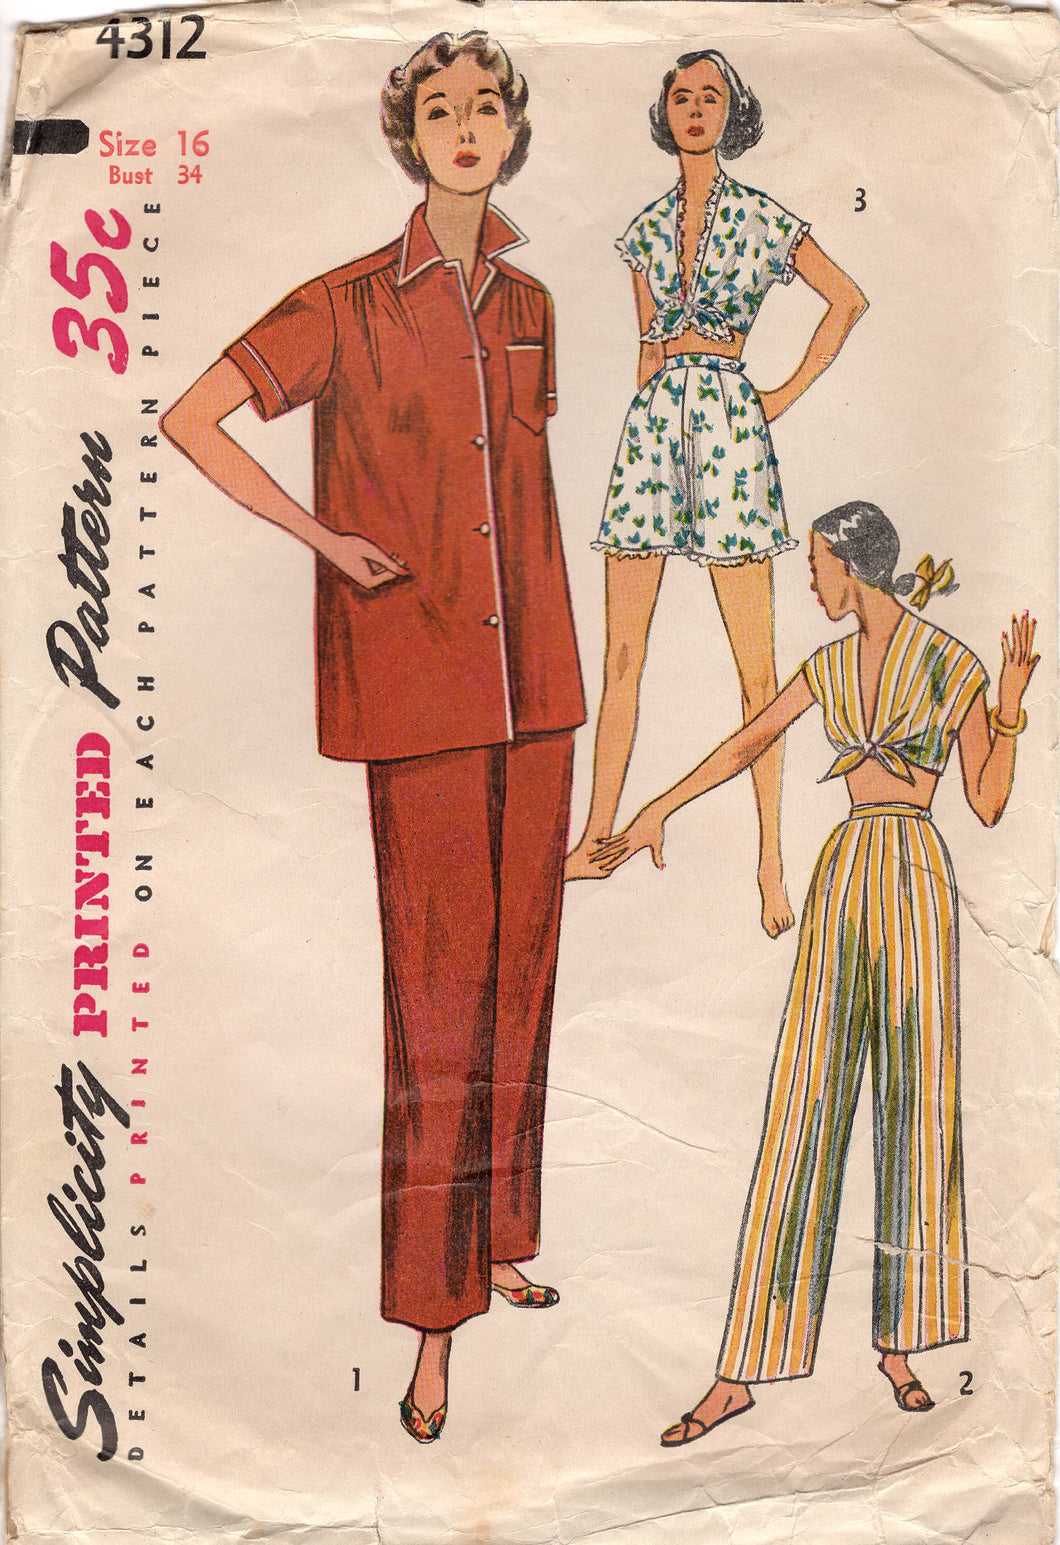 1950's Simplicity Two Piece Pajama Set with optional Tie Top and Shorts - Bust 34